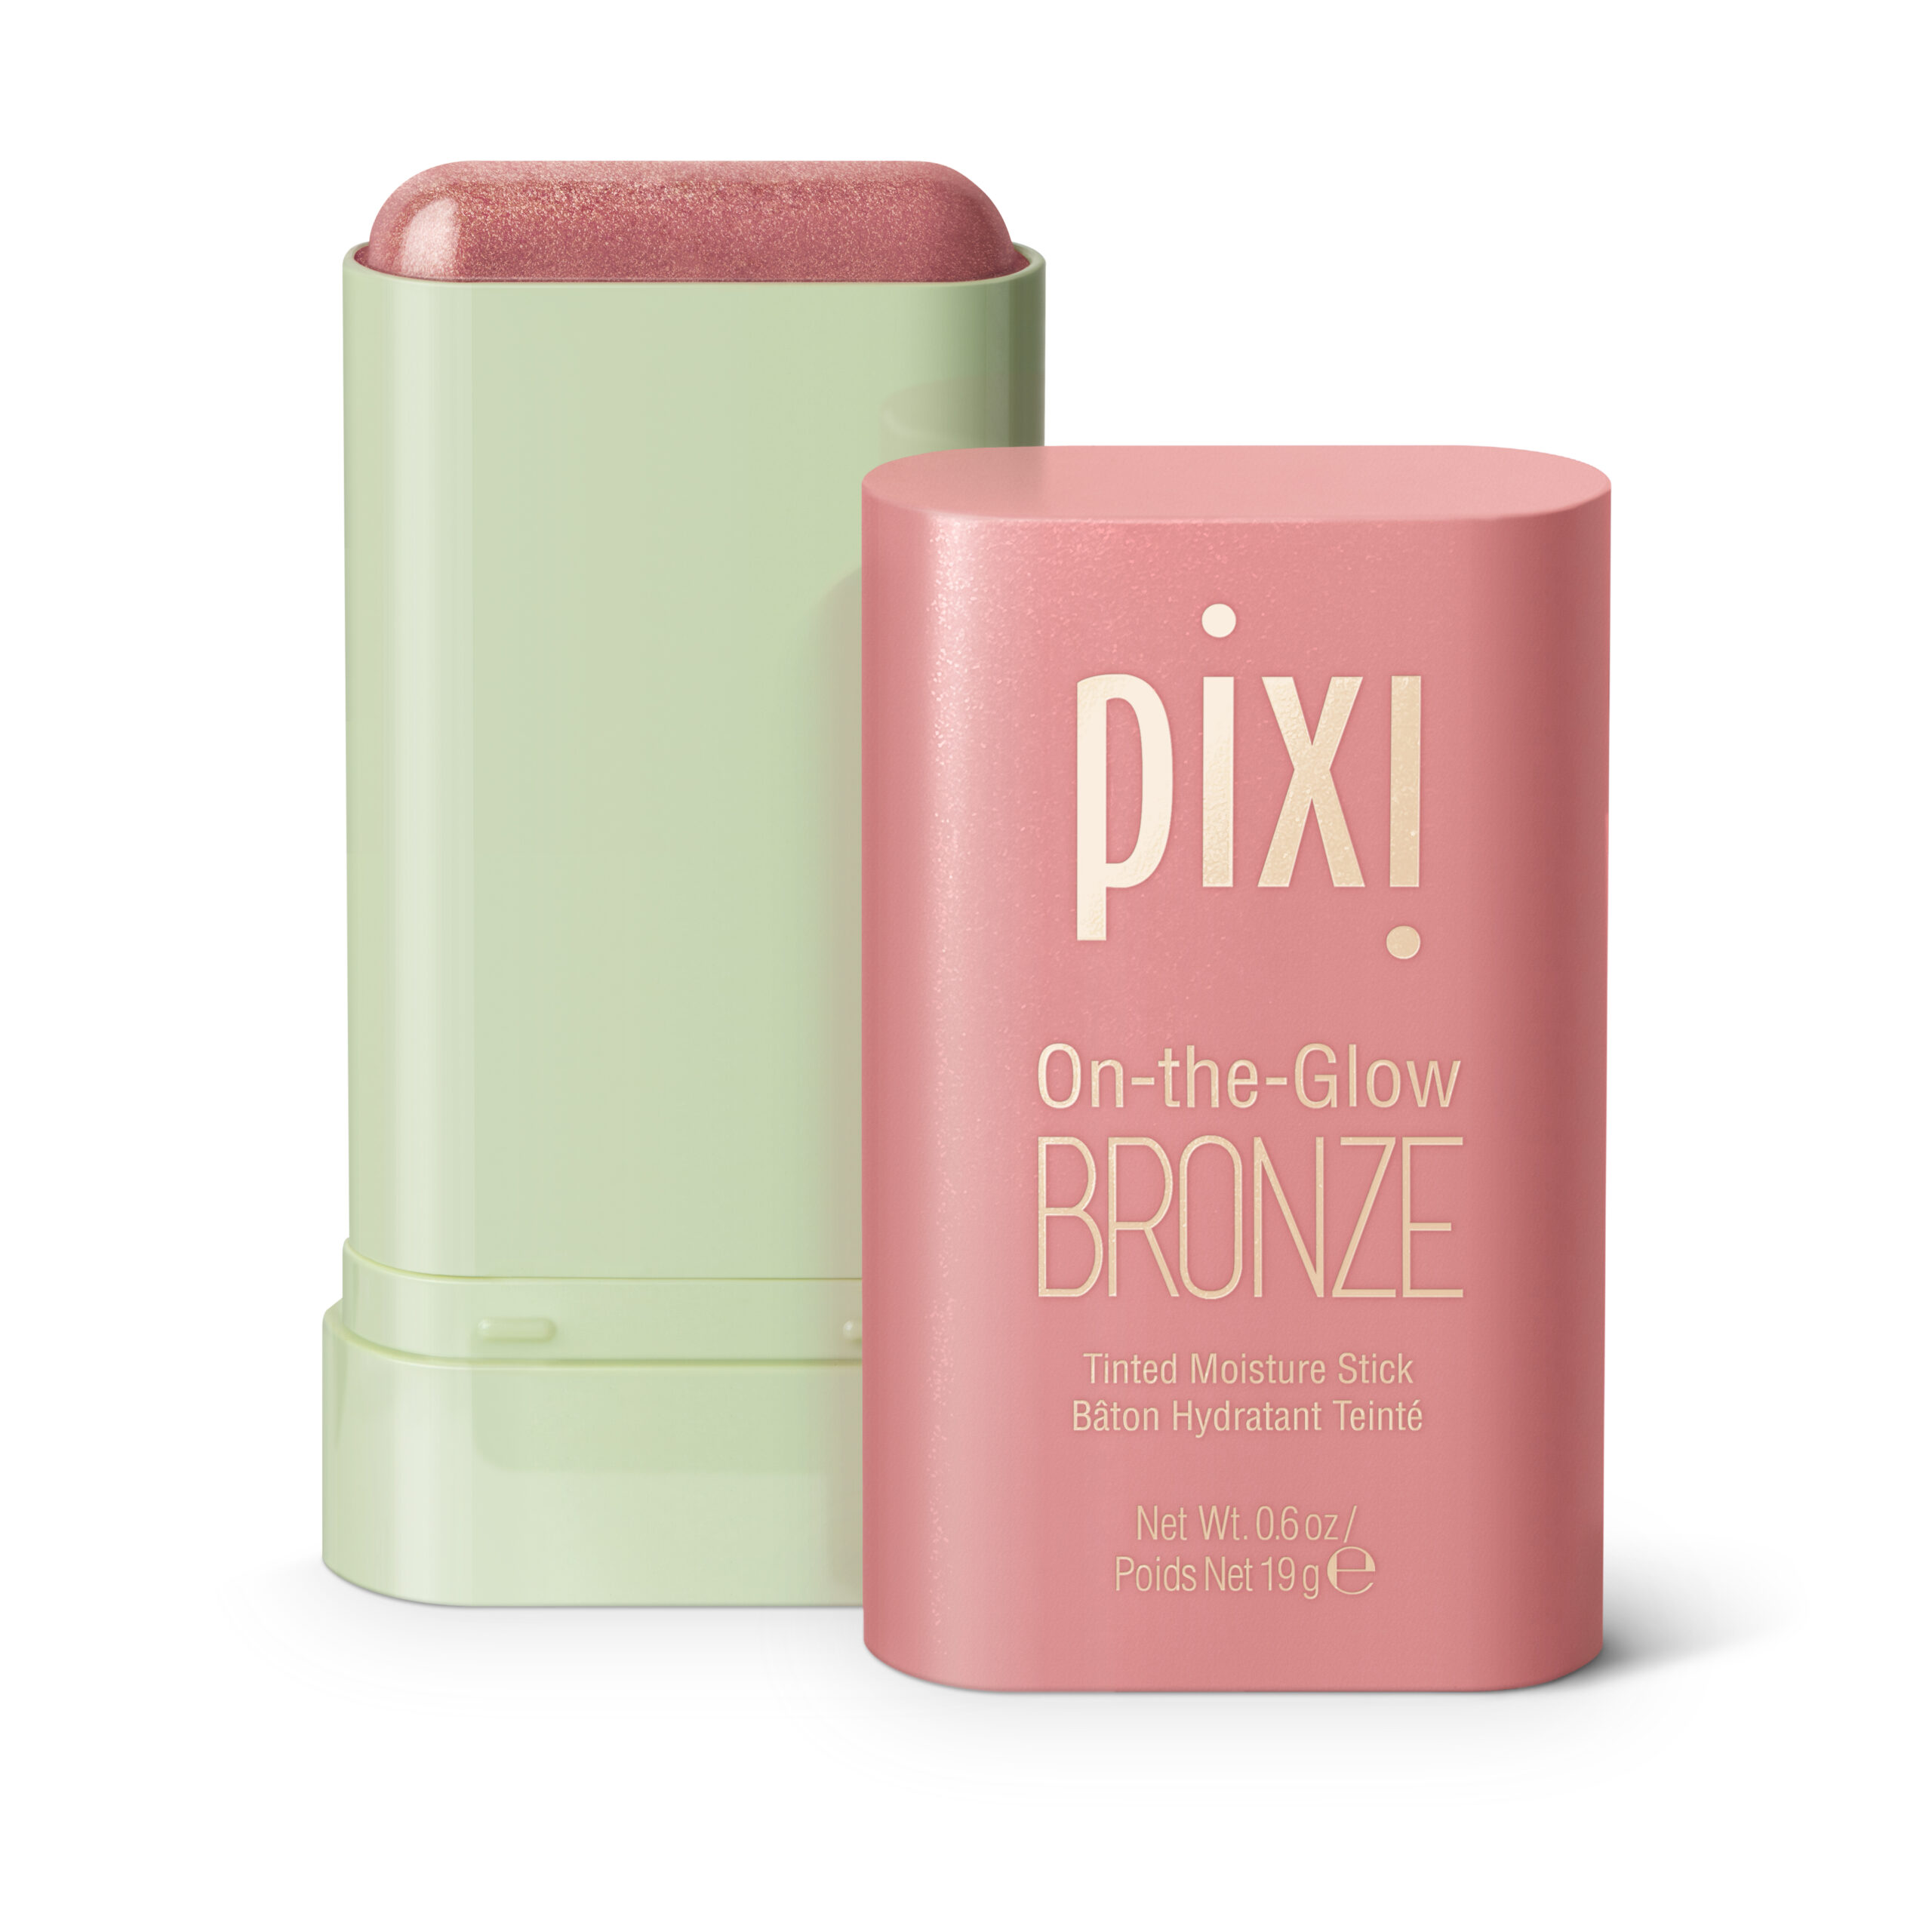 Blush you can trust (Picture: Pixi) 